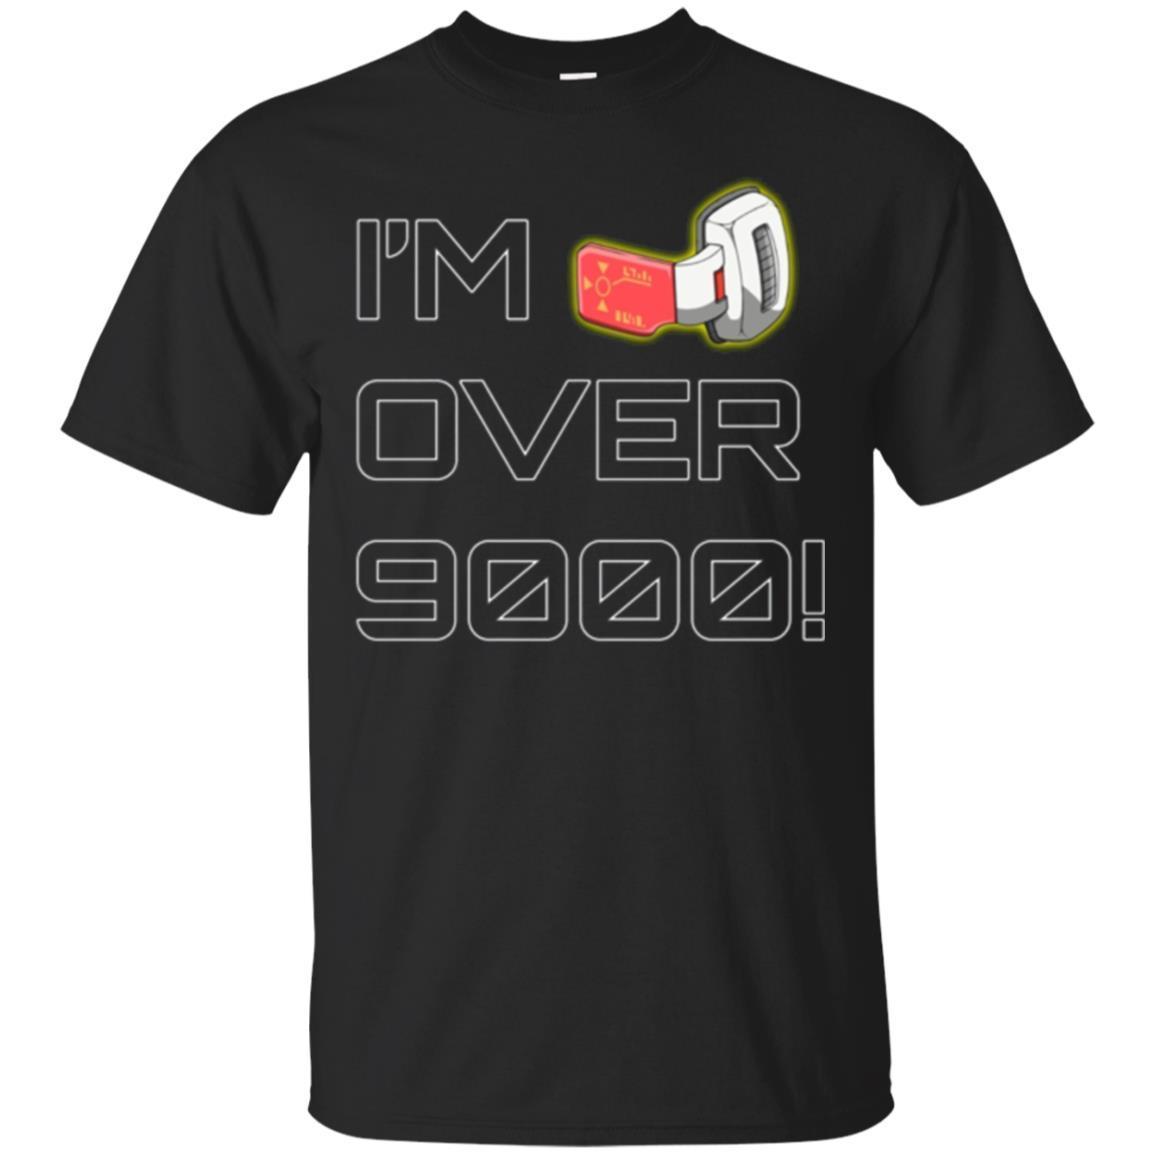 ‘i’m Over 9000’, ‘it’s Over 9000’ – T Shirt